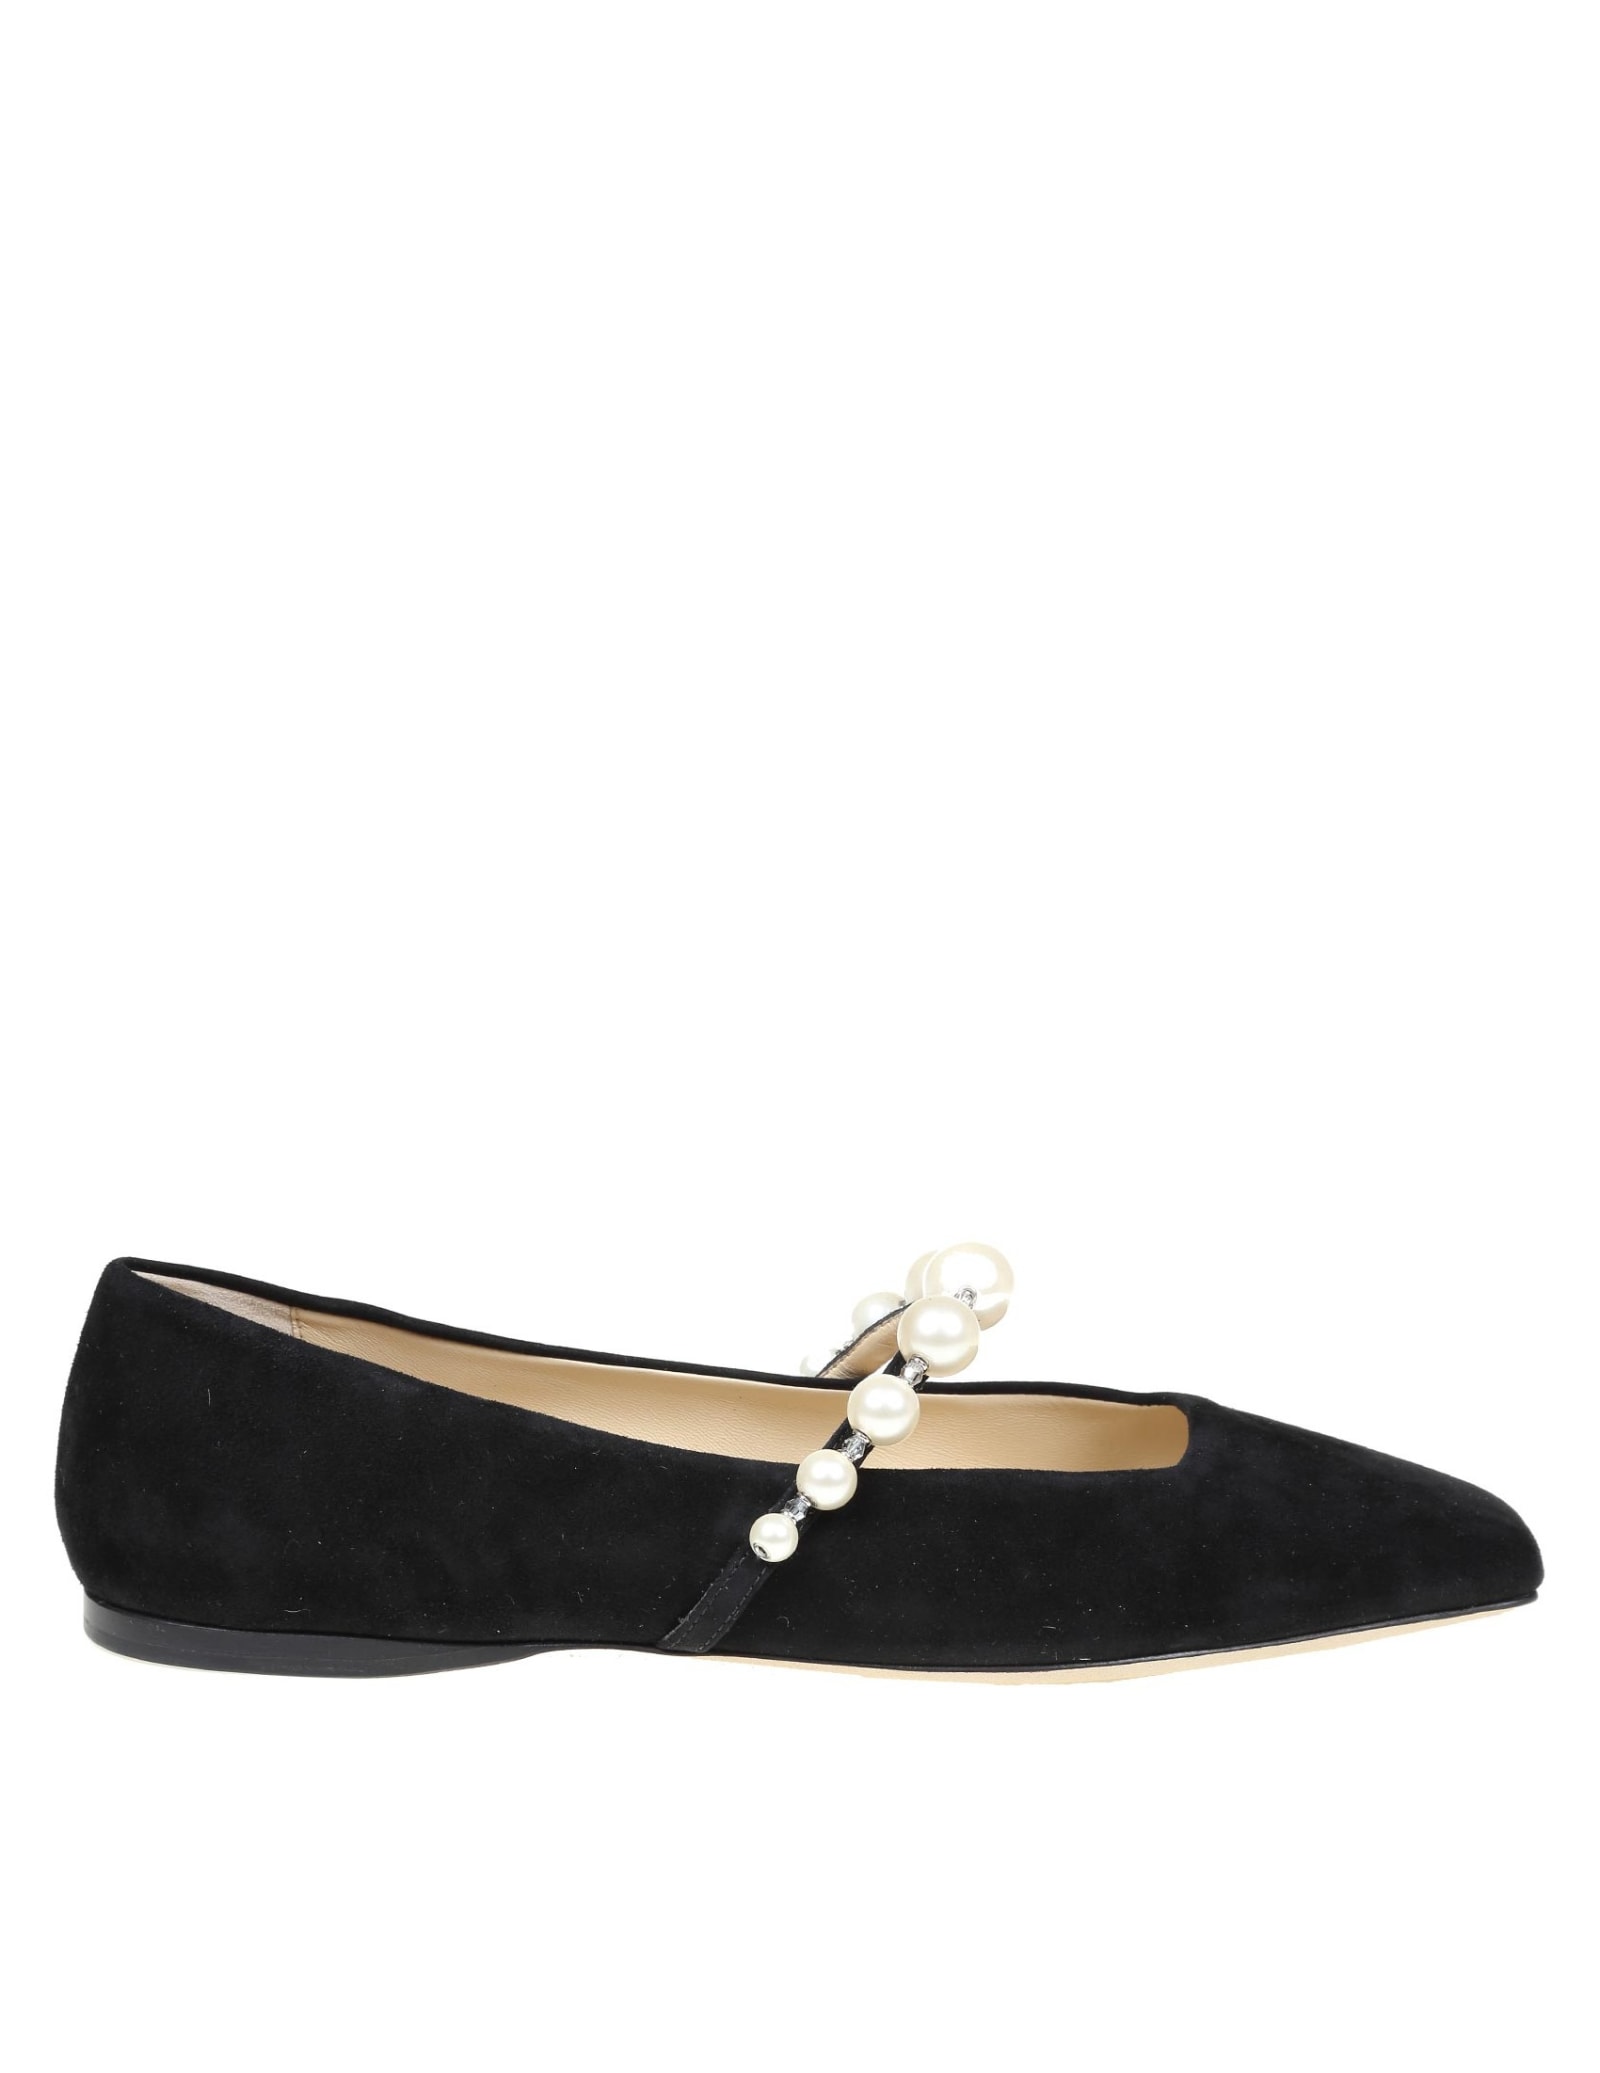 Buy Jimmy Choo Ade Flat In Black Suede online, shop Jimmy Choo shoes with free shipping